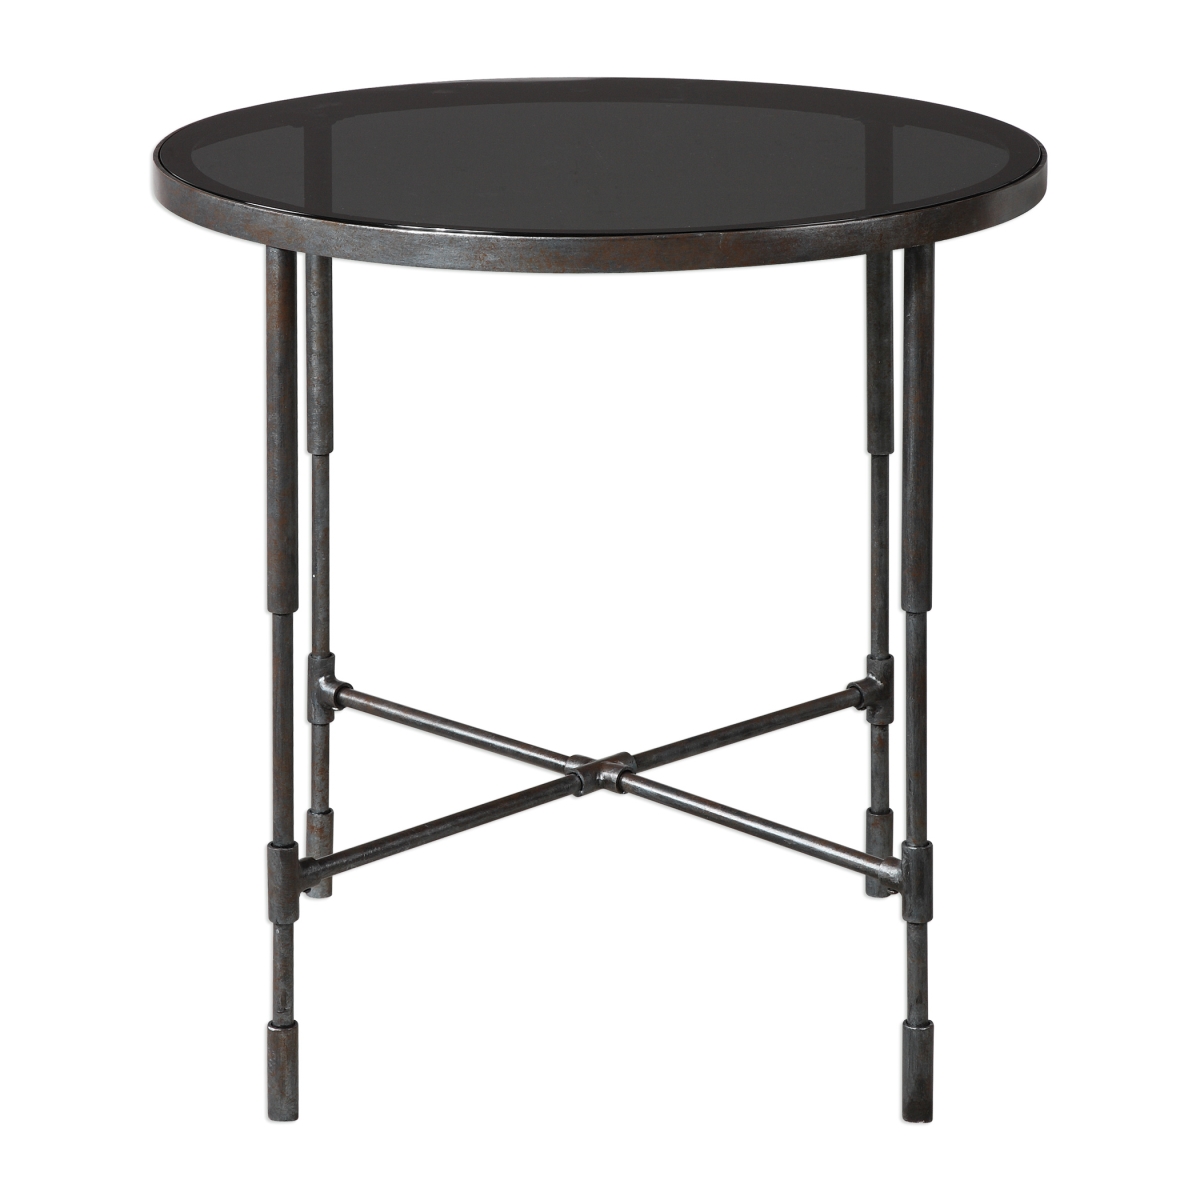 Picture of 212 Main 24783 Vande Aged Steel Accent Table